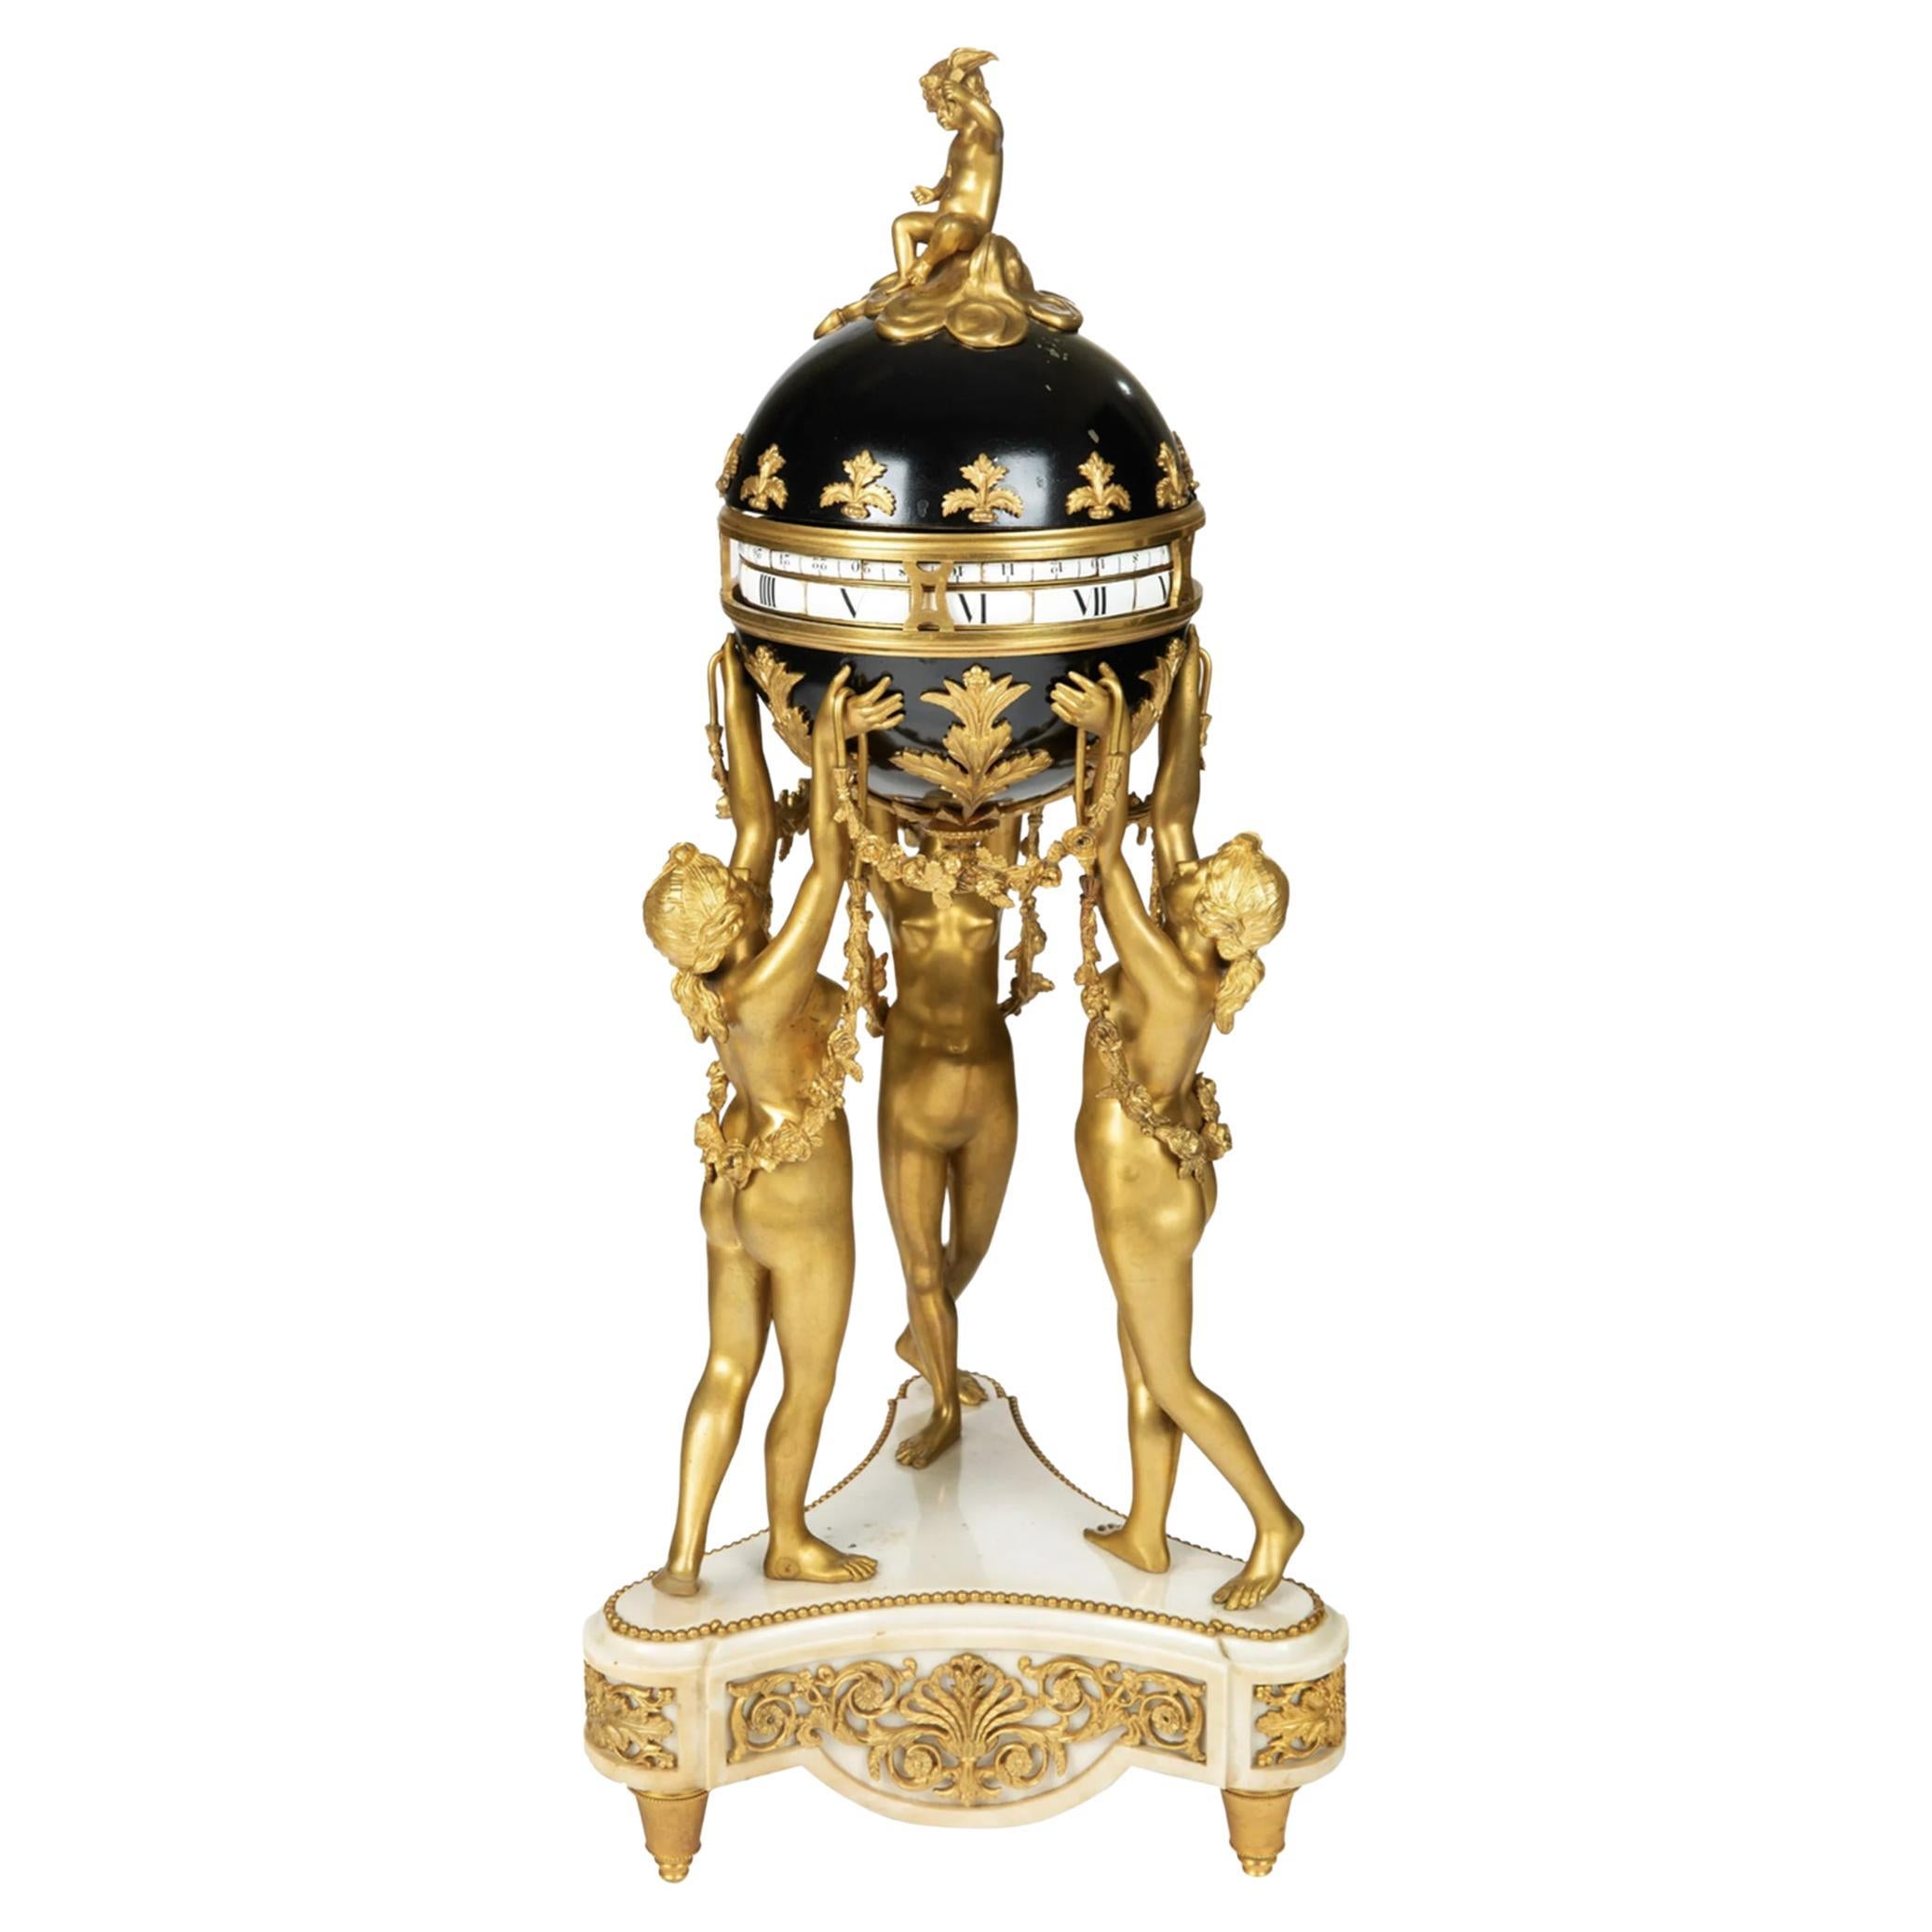 French Gilt Bronze and Mable Three Graces Clock by Samuel Marti & Cie